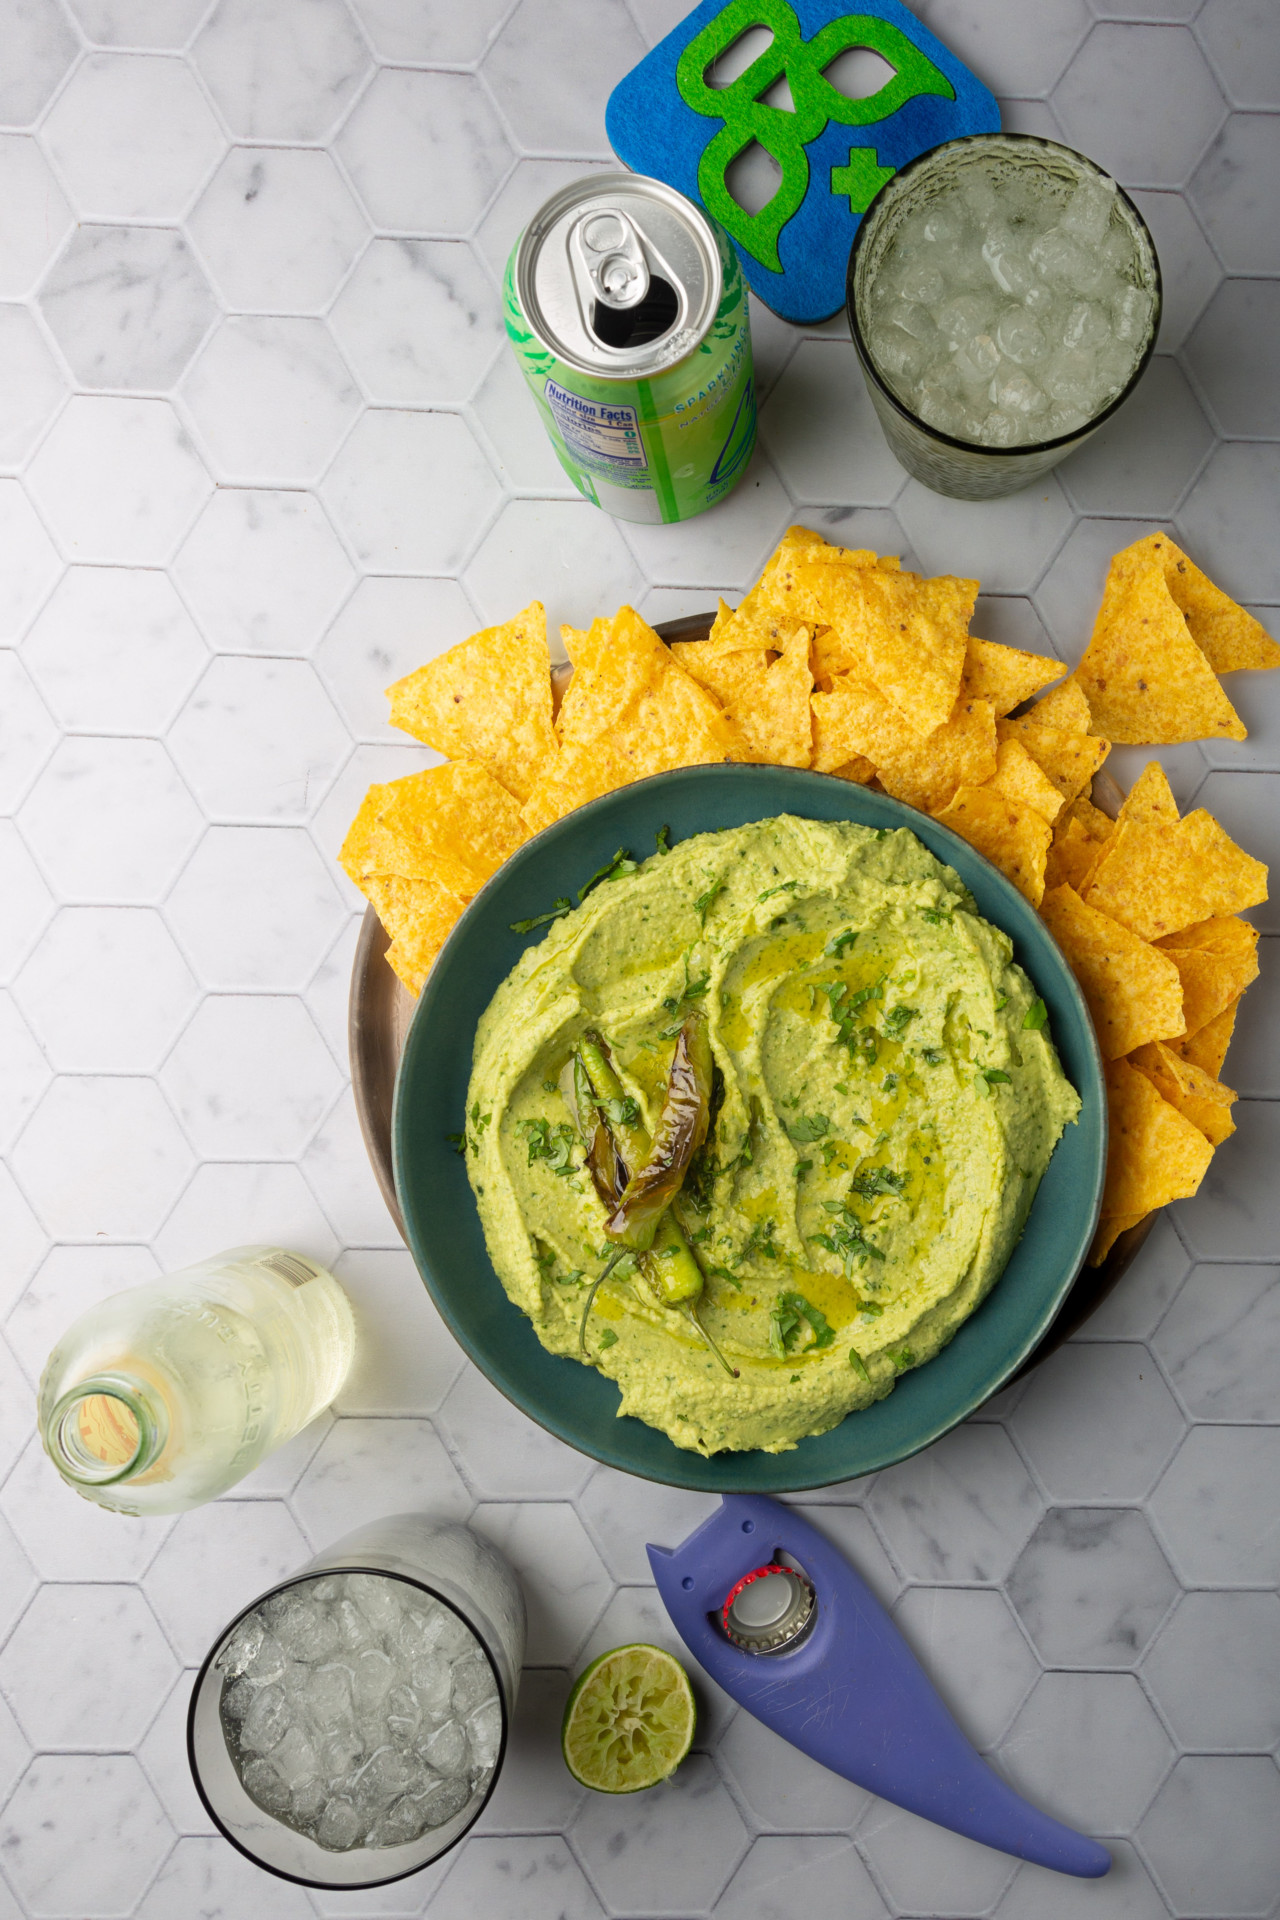 A bowl of avocado hummus topped with grilled jalapenos, surrounded by corn tortilla chips on a hexagon-patterned surface. Nearby are drinks, including a green can and a clear bottle, both served in glasses with ice. A juiced lime half and a blue shark-shaped bottle opener complete the scene.